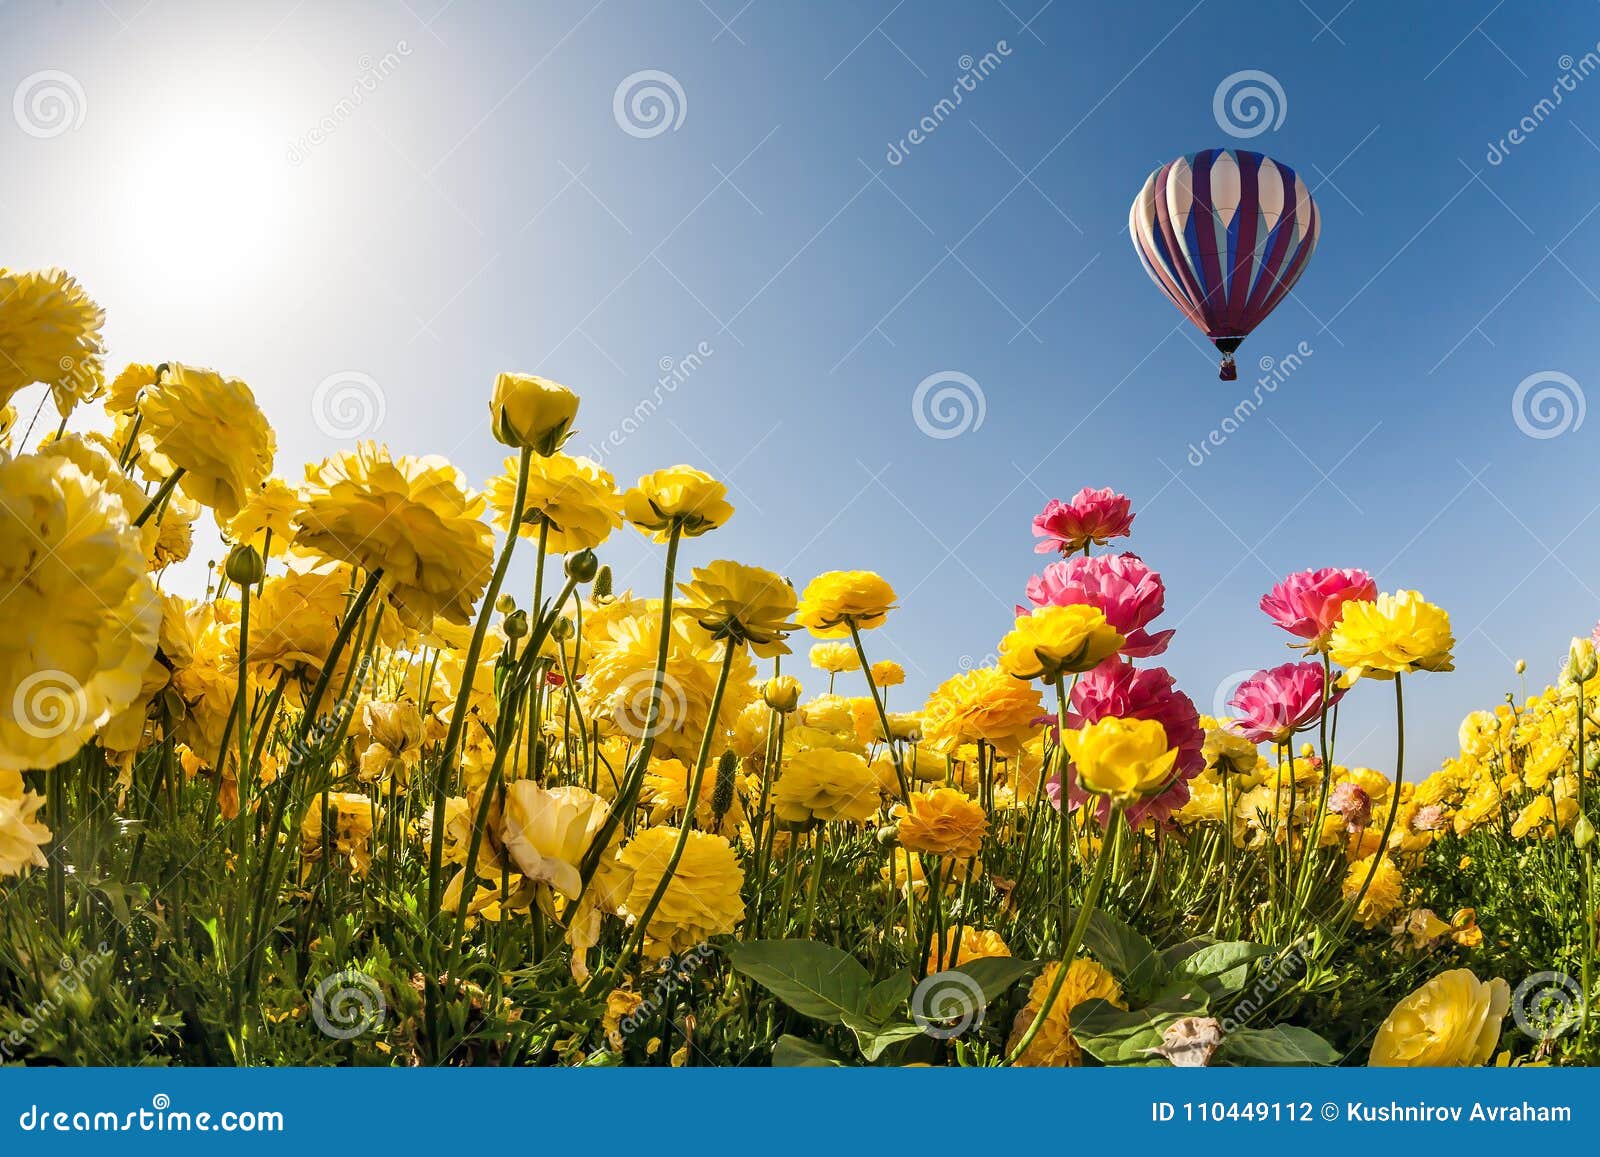 Neverland Sun, Flowers and Balloon Stock Photo - Image of tourism ...